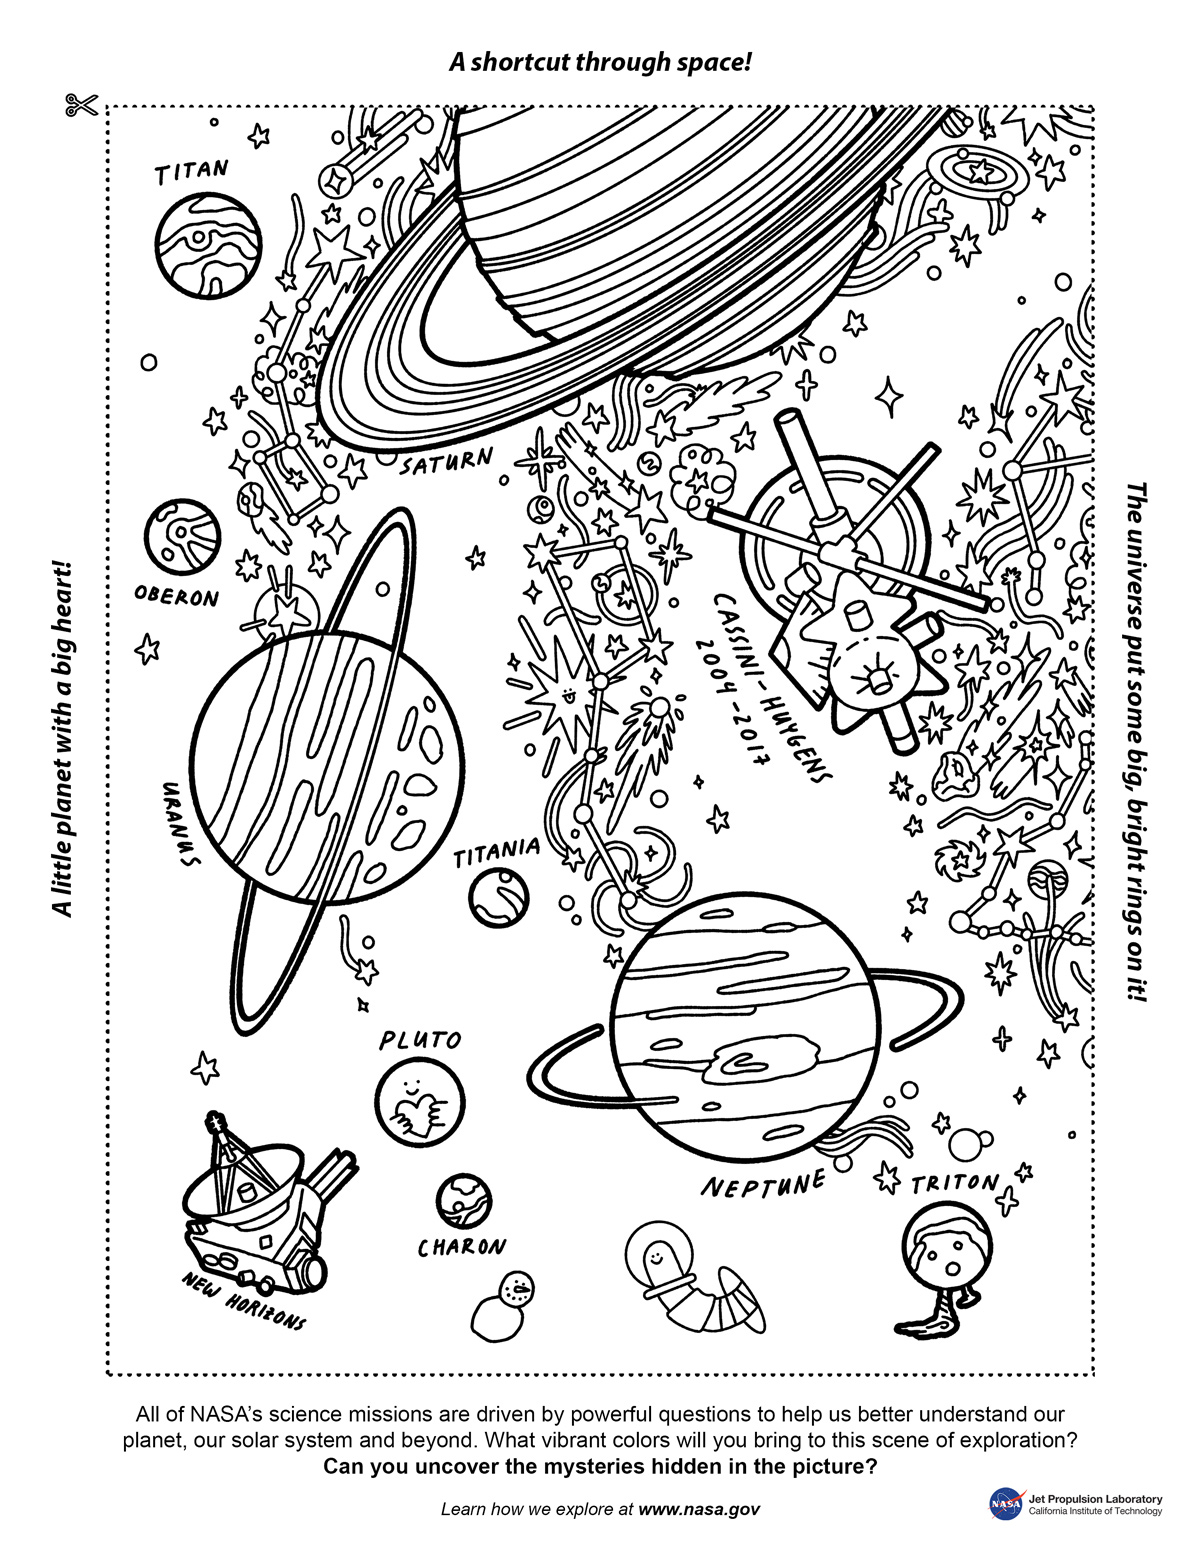 coloring page featuring Saturn, Uranus, Neptune, some of their moons, and the Cassini-Huygens and New Horizons spacecraft